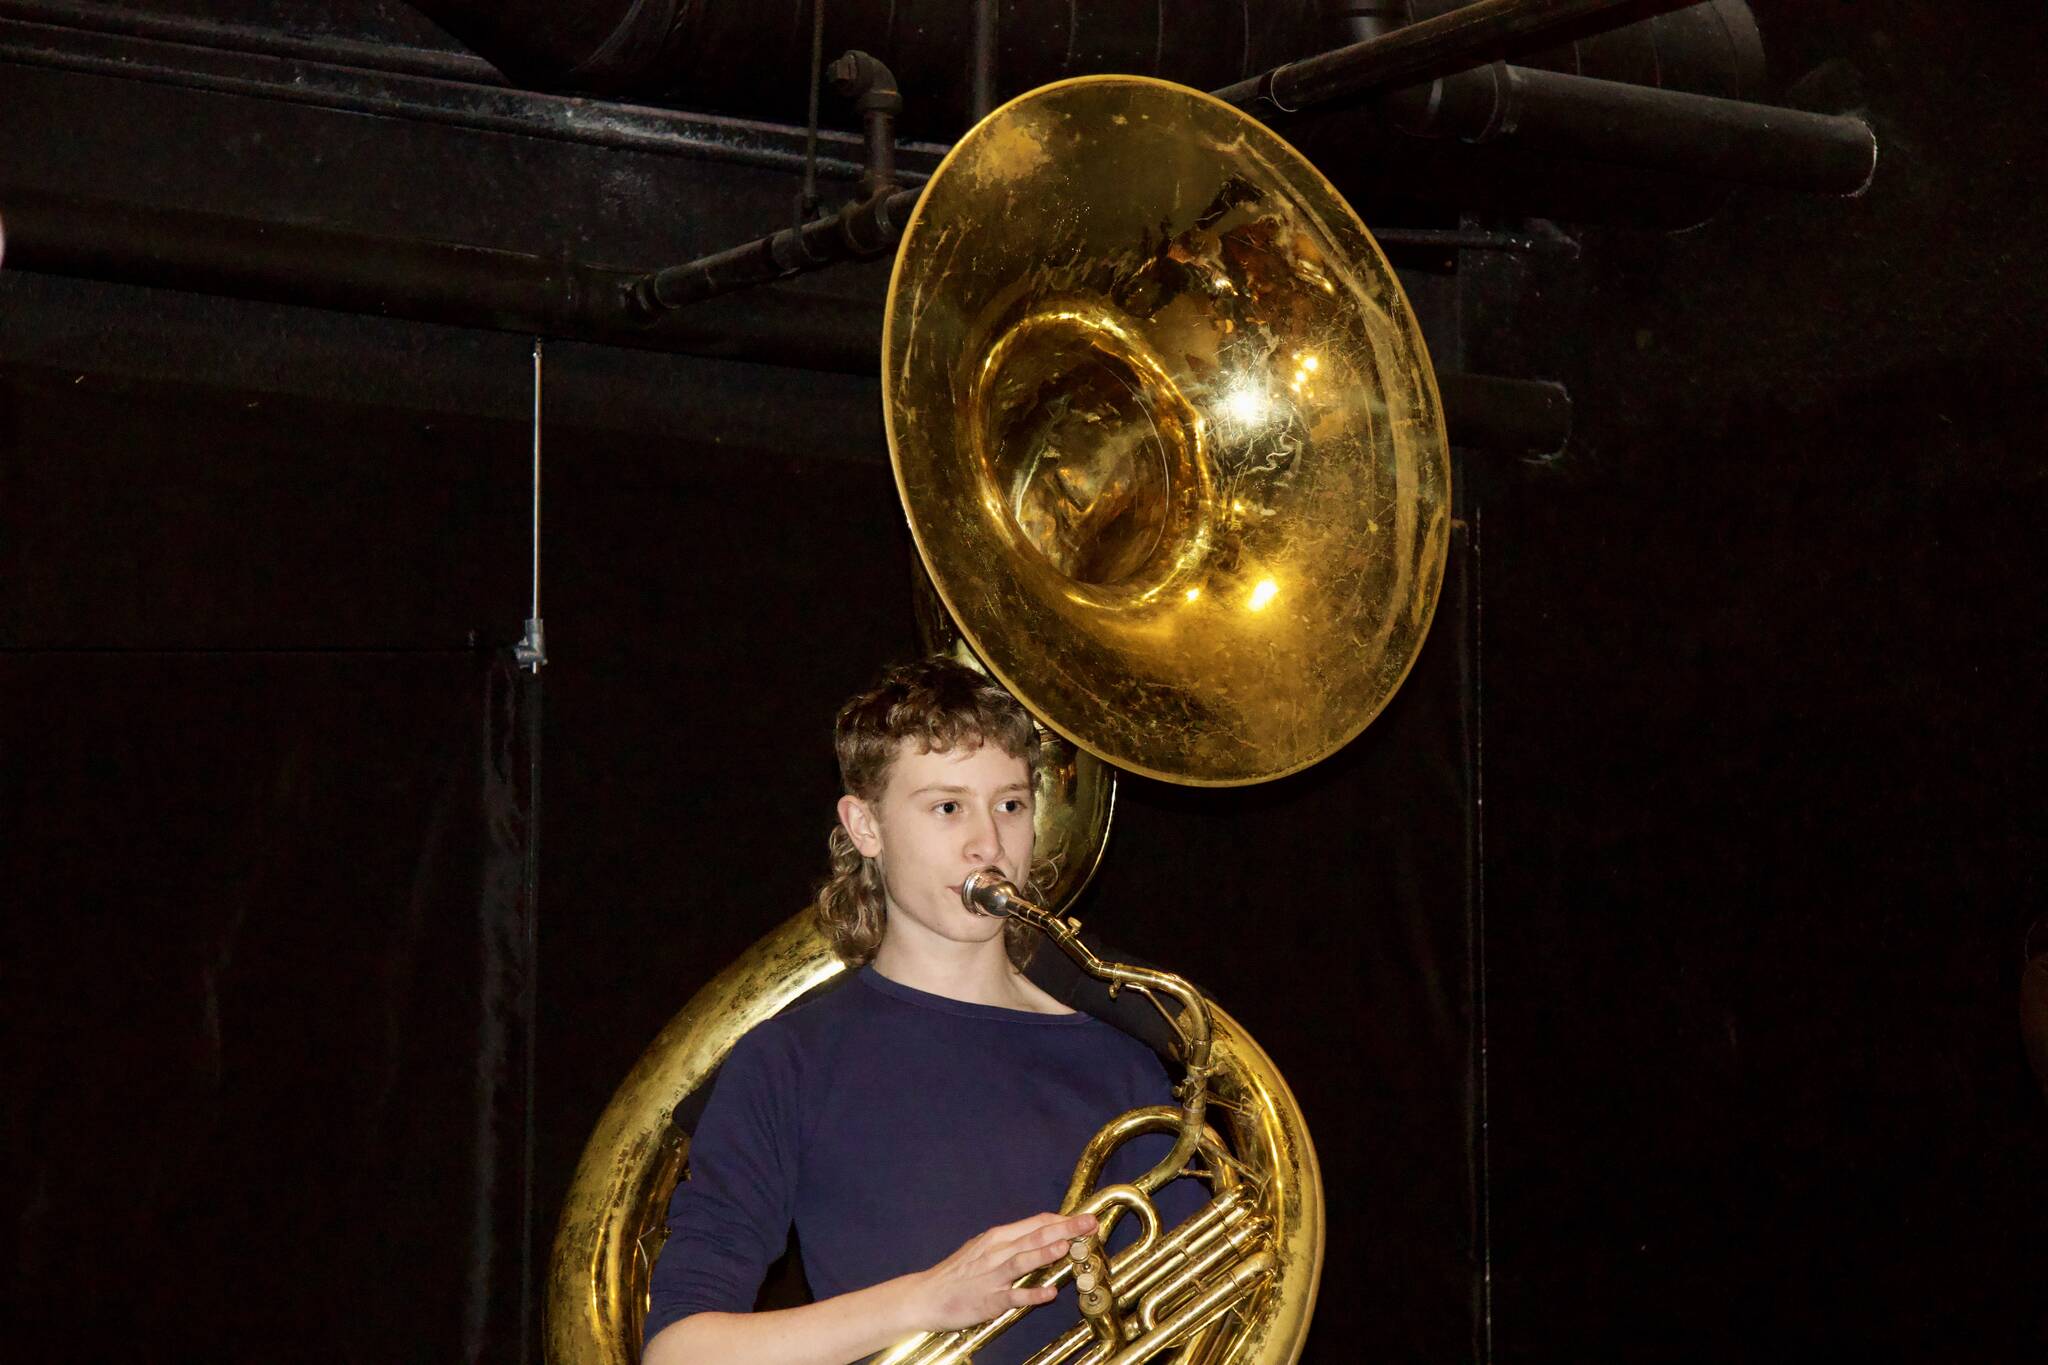 Photo by Rachel Rosen/Whidbey News-Times
Colton Gehring plays the sousaphone for Kick-Brass.